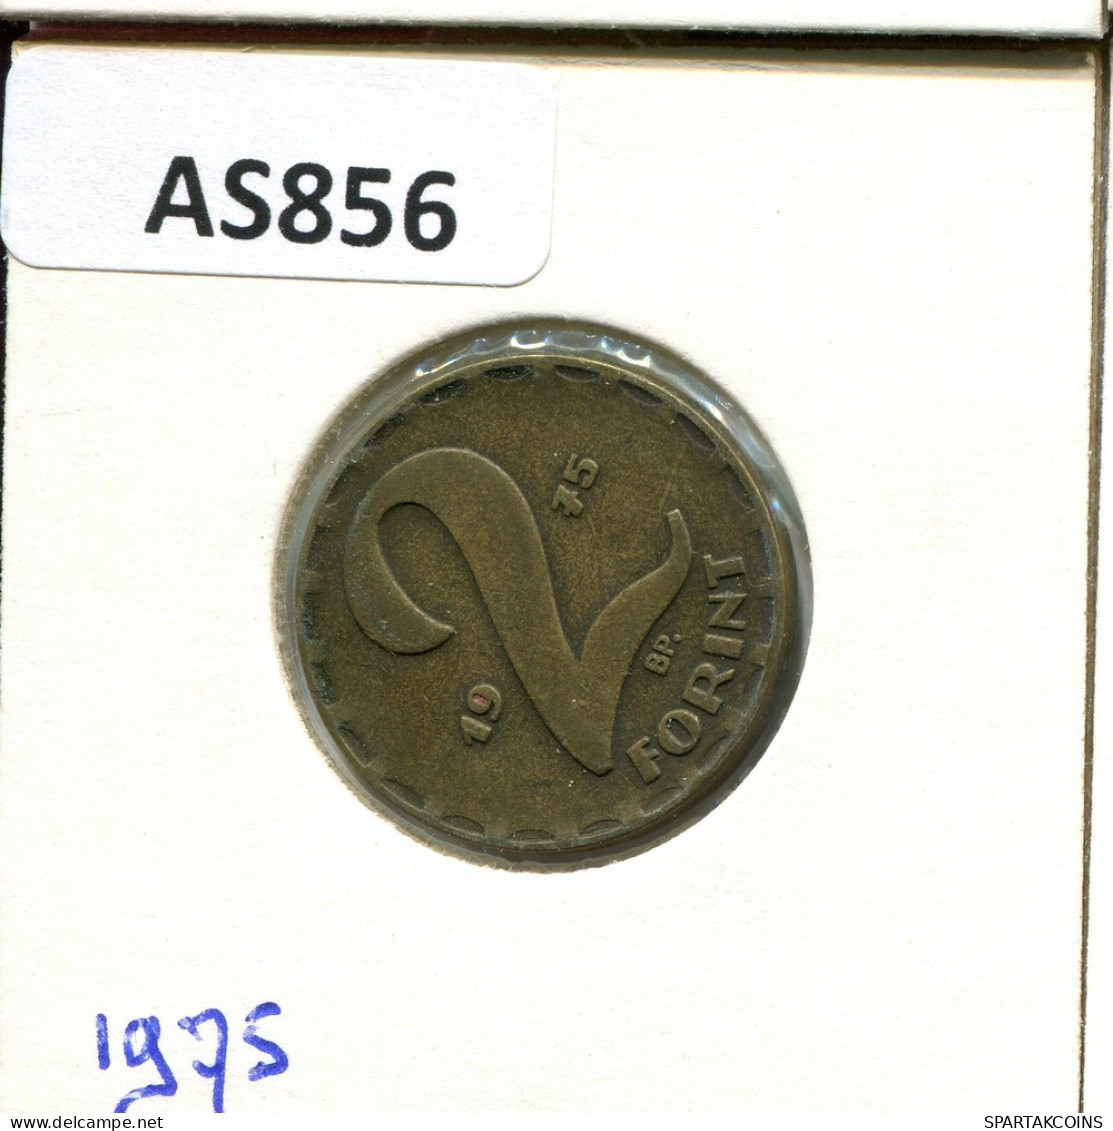 2 FORINT 1975 HUNGARY Coin #AS856.U.A - Ungheria